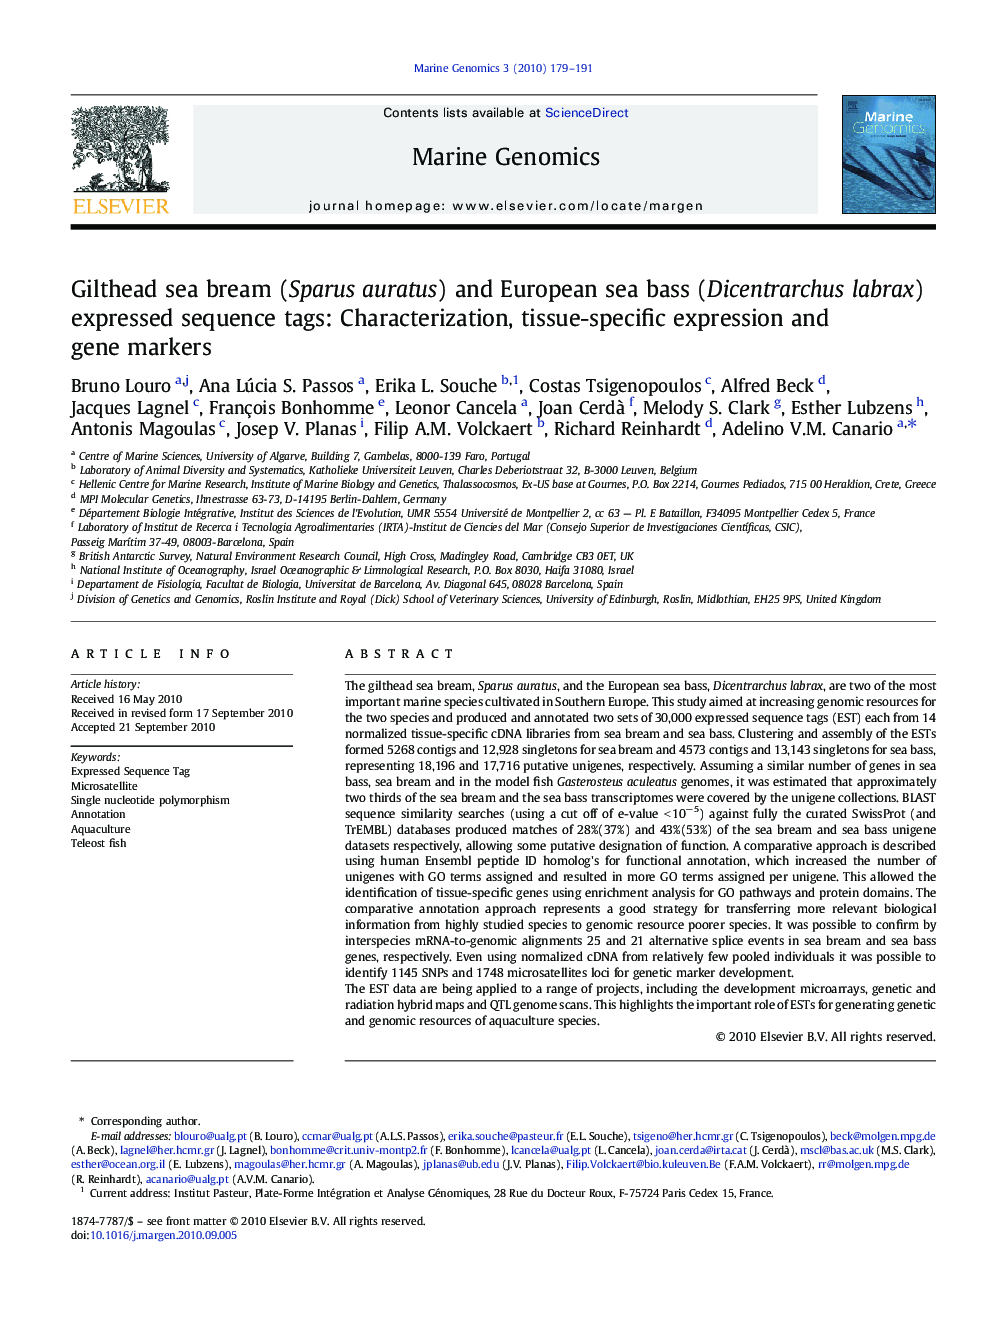 Gilthead sea bream (Sparus auratus) and European sea bass (Dicentrarchus labrax) expressed sequence tags: Characterization, tissue-specific expression and gene markers